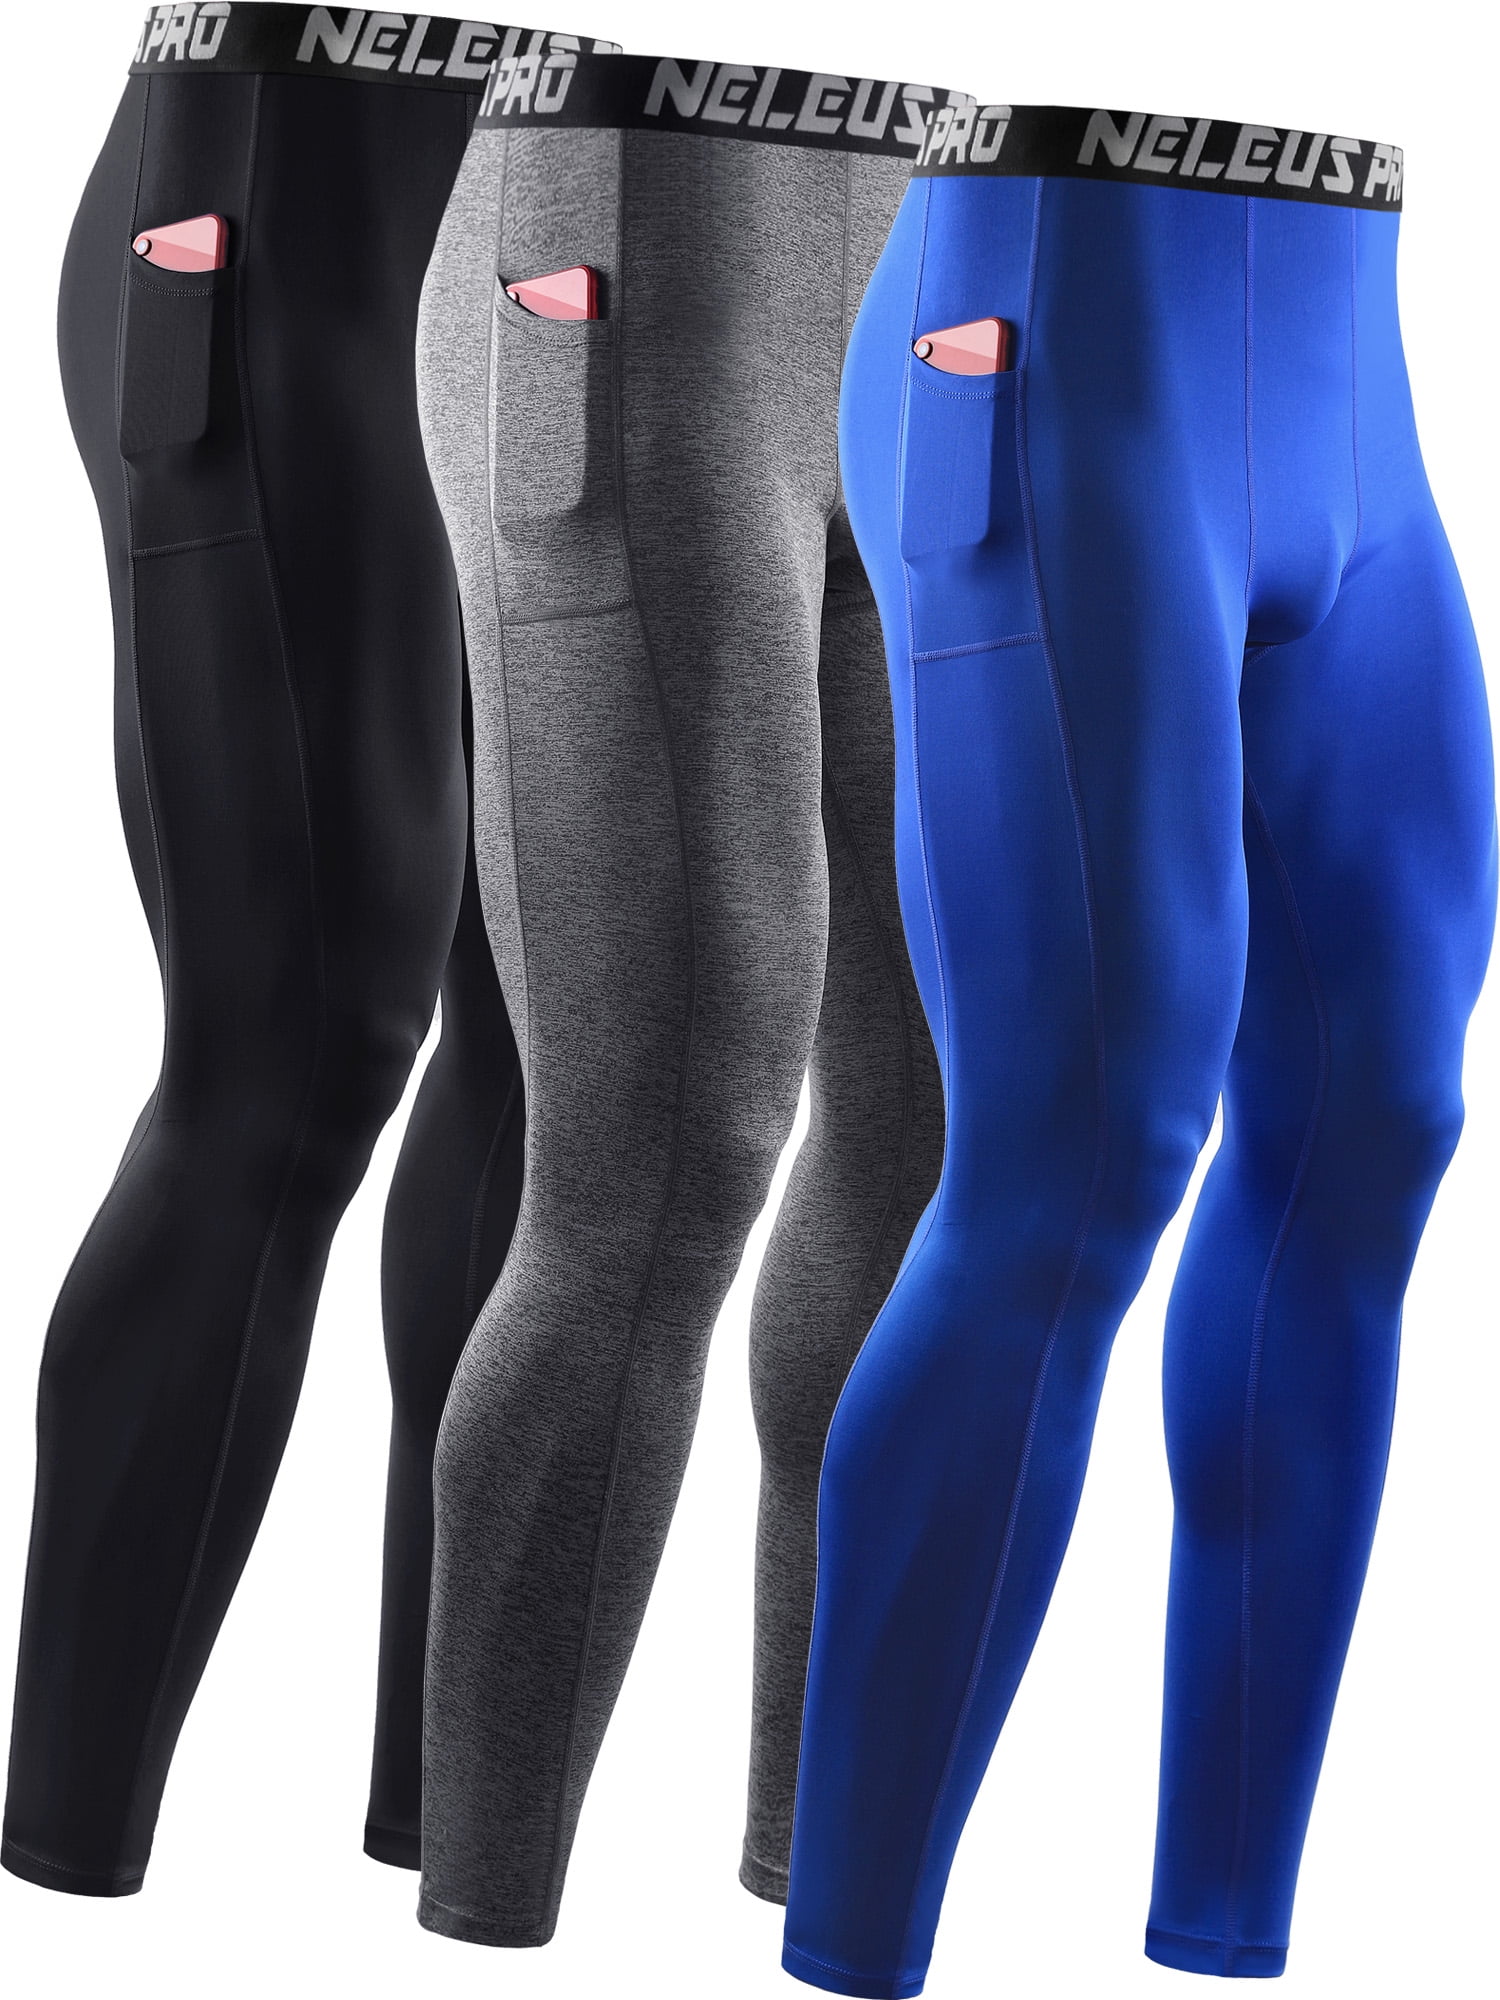 NELEUS Mens Dry Fit Compression Base layer Pants Running Tights ...